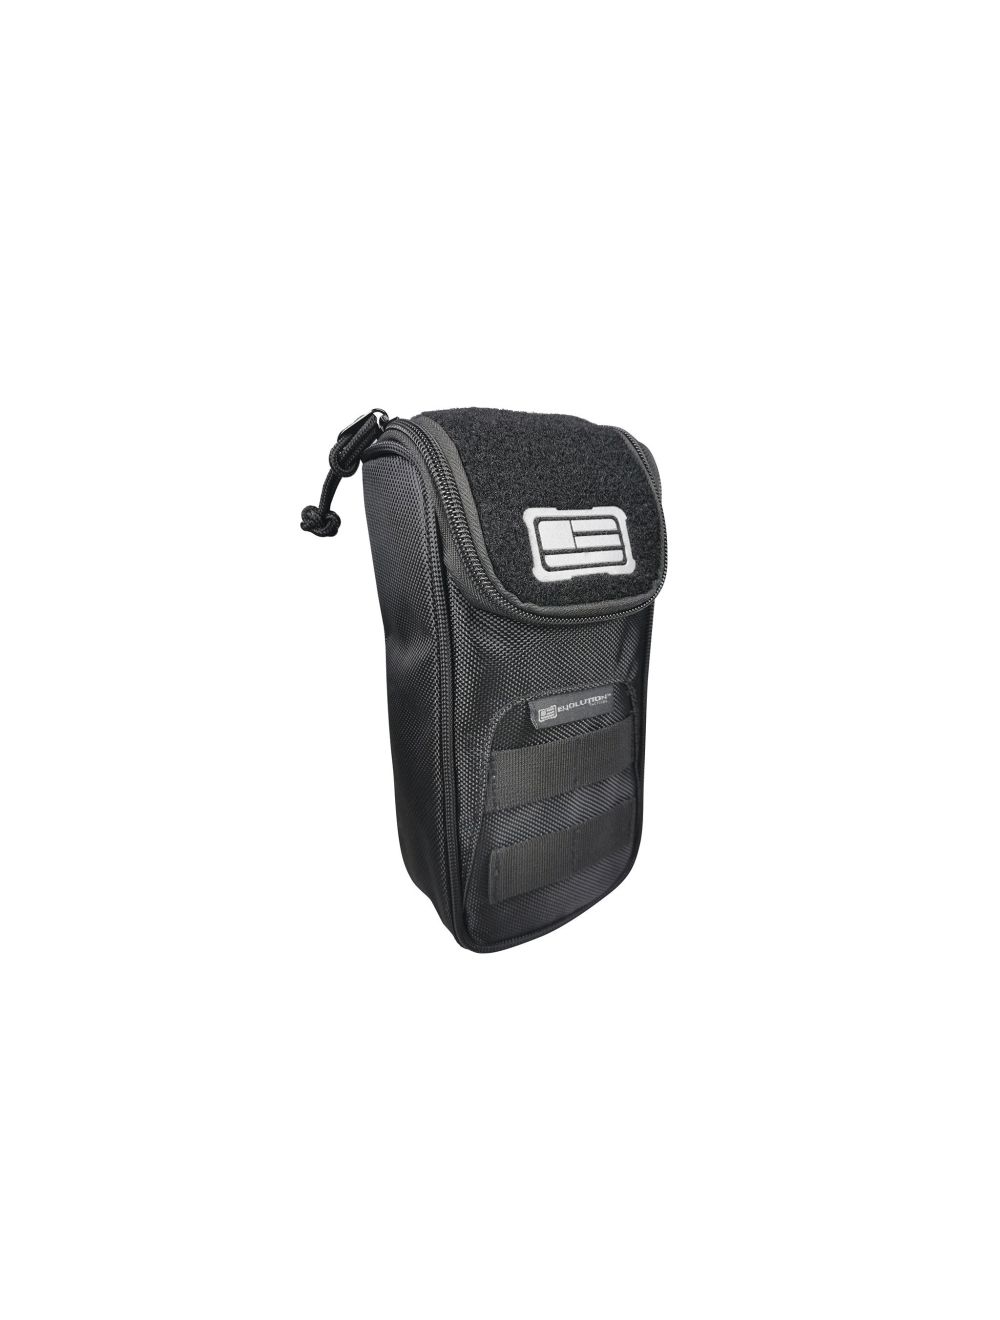 1680D Tactical Accessory Pouch